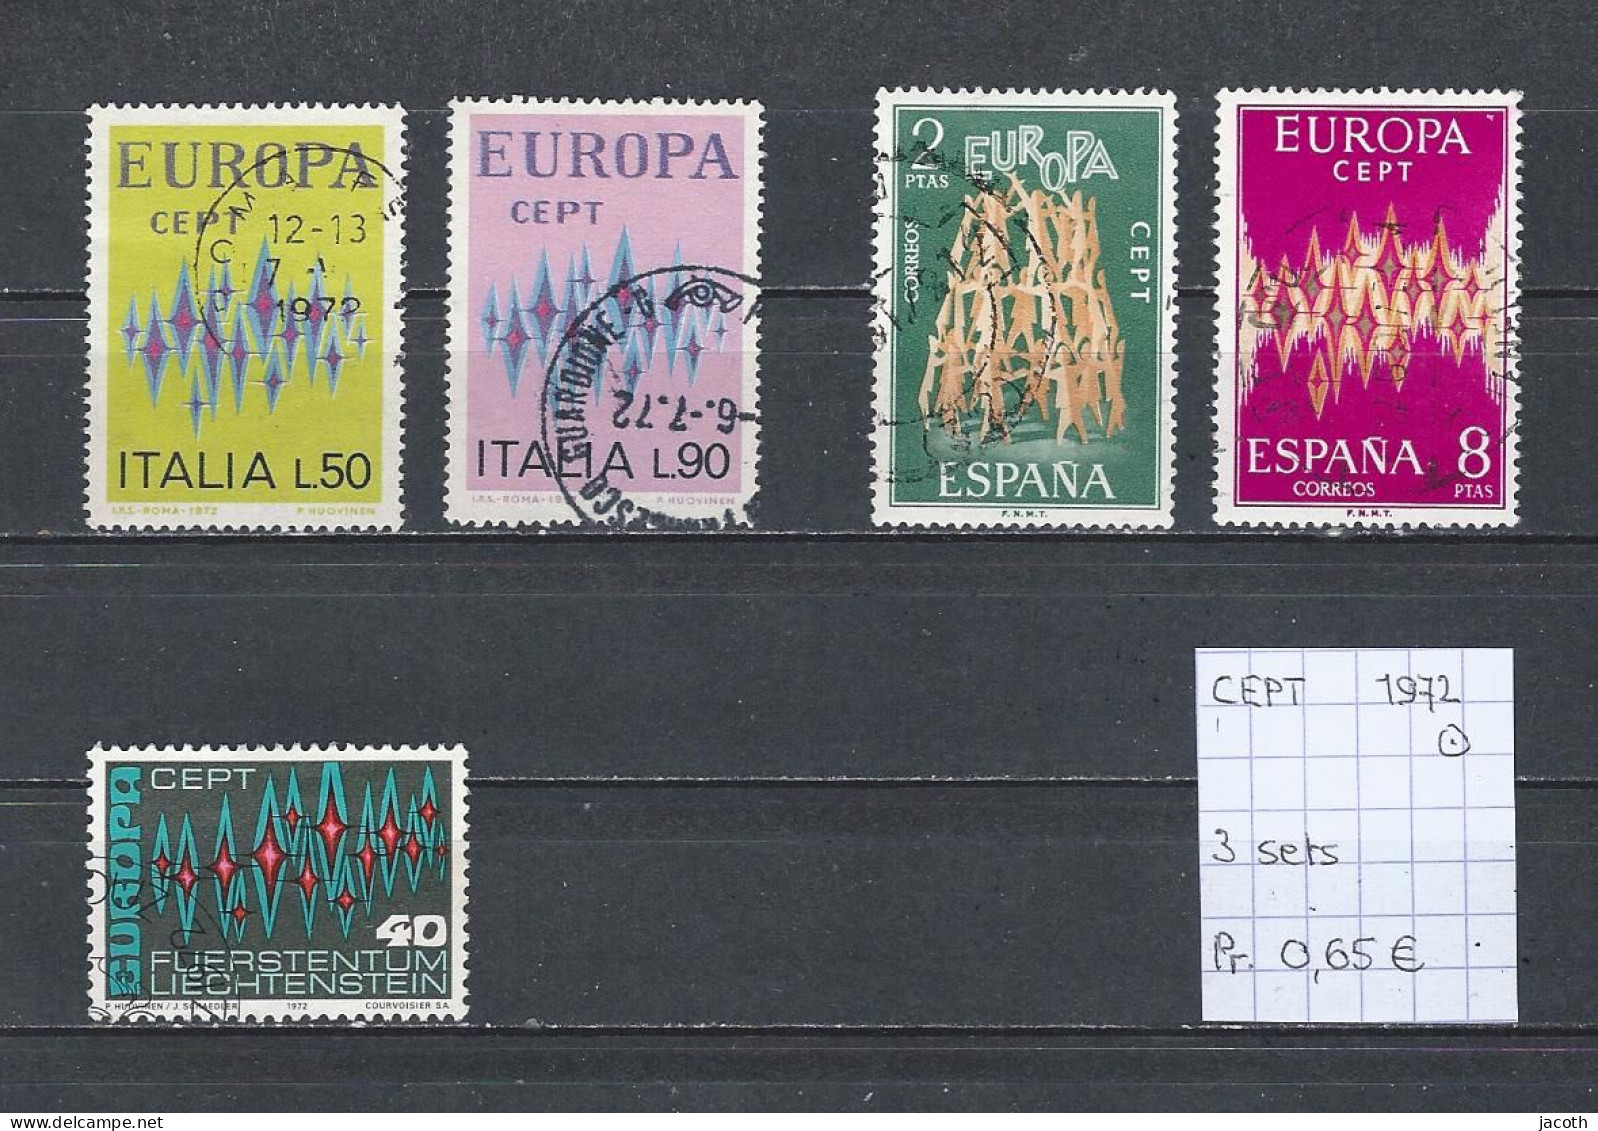 (TJ) Europa CEPT 1972 - 3 Sets (gest./obl./used) - 1972